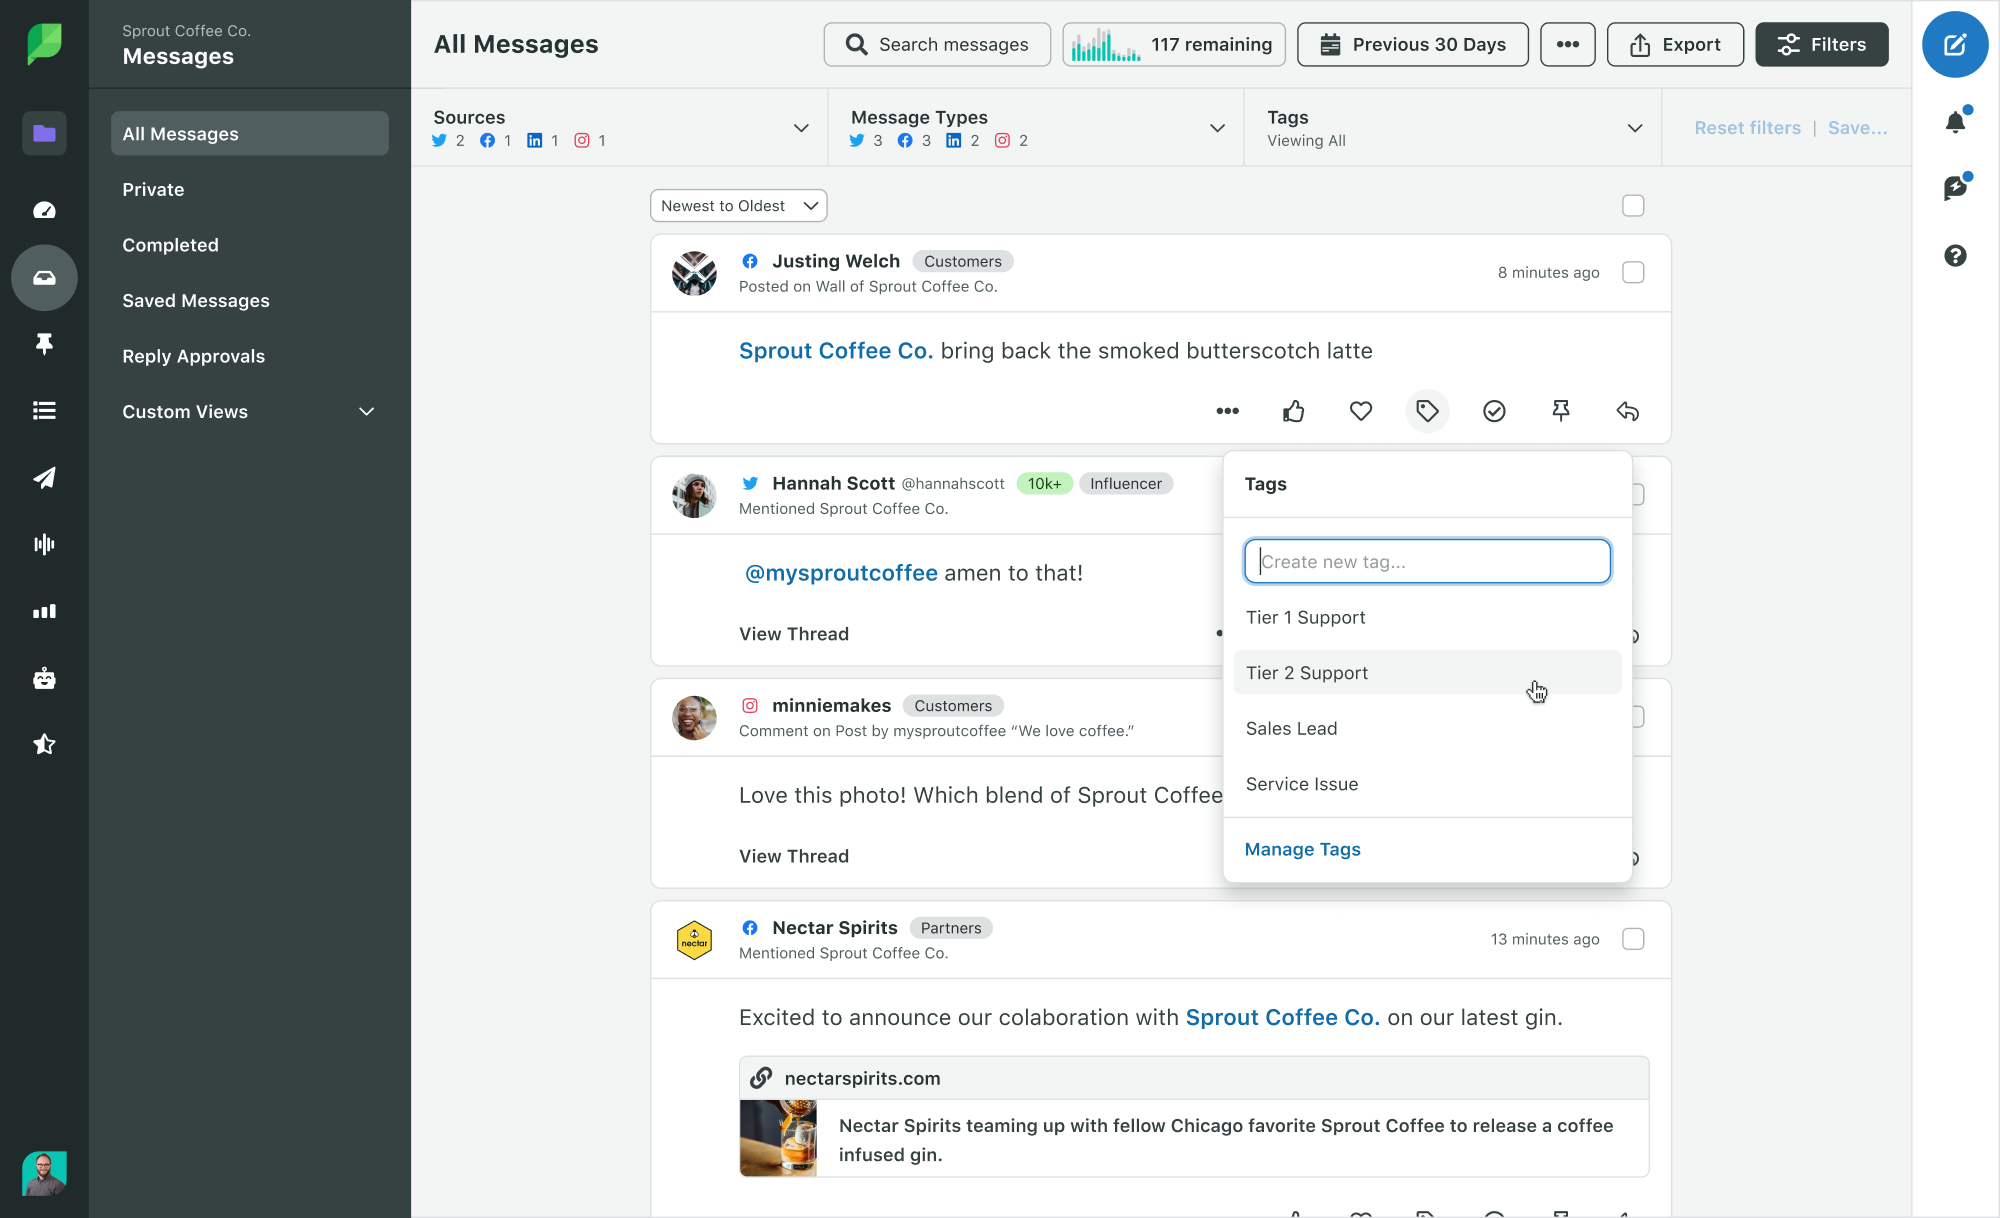 Sprout Social's Smart Inbox with message tagging and collaboration